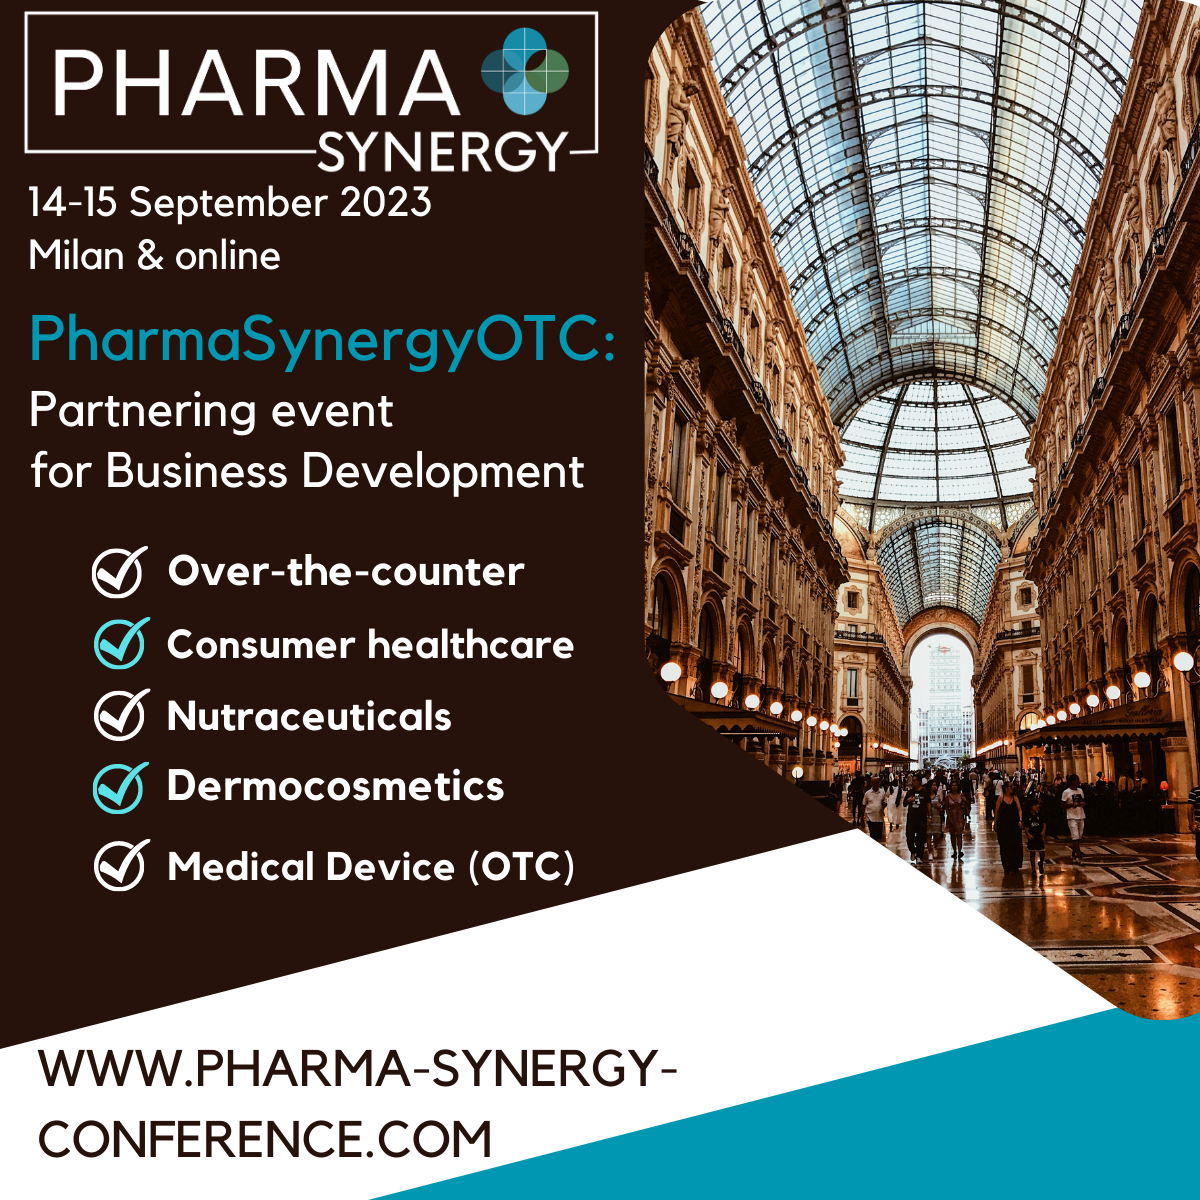 PharmaSynergy is a partnering platform for pharma BD & distribution executives. In addition to B2B partnering, the event offers a content-driven agenda highlighting the latest trends & analytics, analyzing successful commercial strategies & growth drivers, and facilitating better understanding across mature & pharmerging regions.
Product-focused B2B partnering for growth companies with portfolios in:
#OTC
#Consumer_care
#Nutraceuticals & #FSMP
#Dermocosmetics / #medical_cosmetics
#Medical_devices